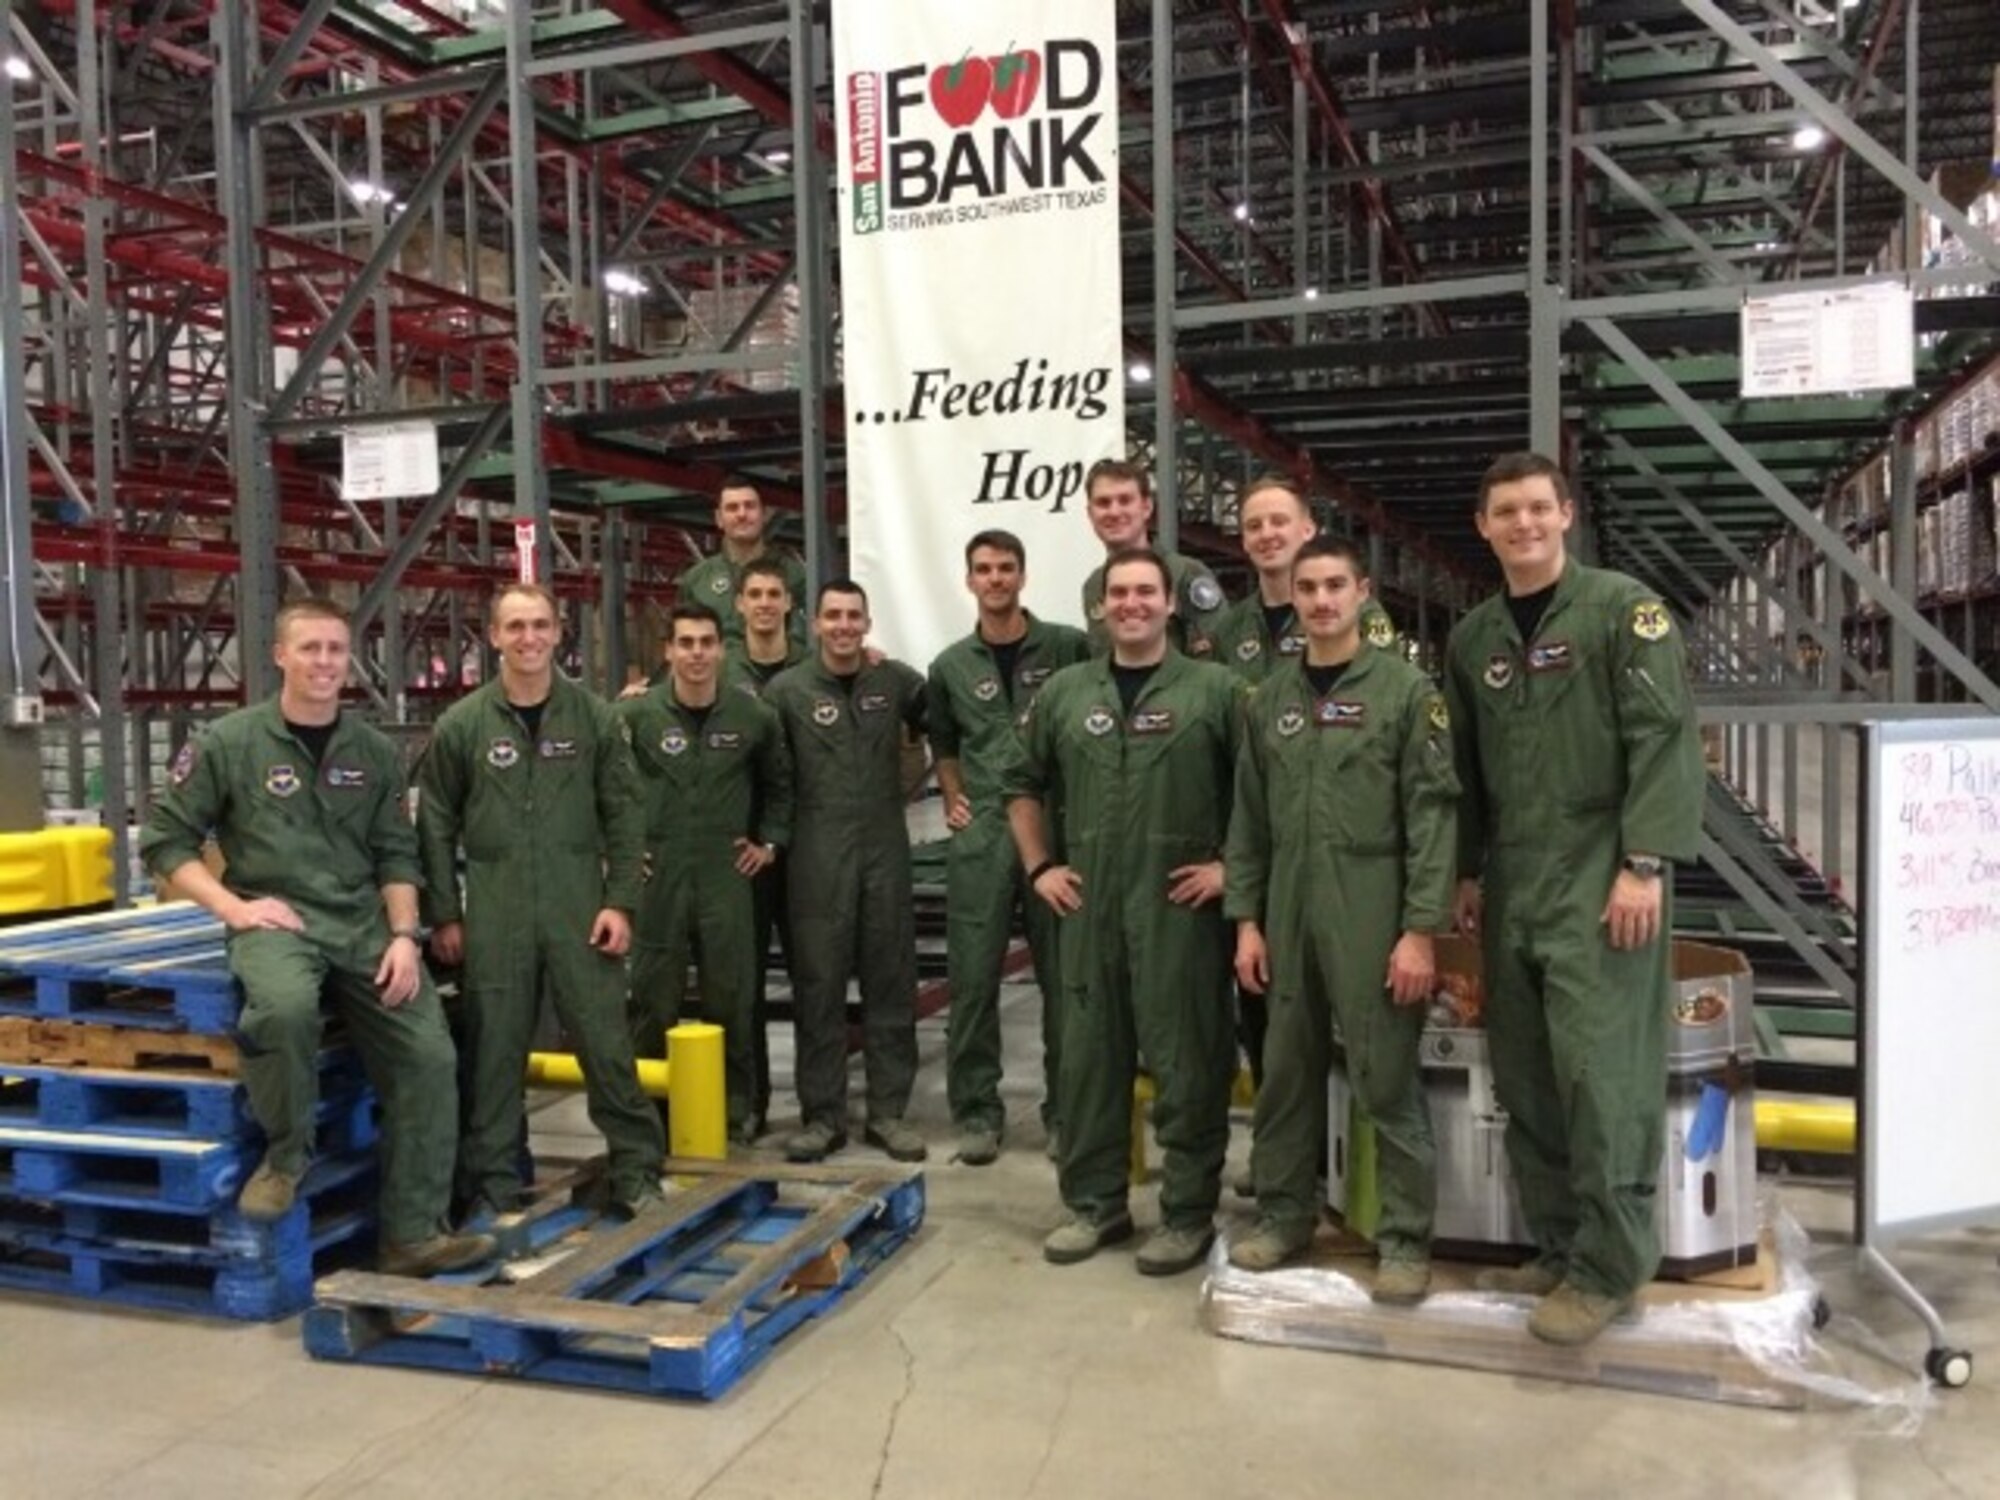 Members of 435th Flying Training Squadron class 16-DBR from Joint Base San Antonio-Randolph take a break after packing 49,875 pounds of food on 95 pallets for distribution to the local community in the form of 39,900 meals to 3,325 local families while at the San Antonio Food Bank Dec. 12, 2015.  The community outreach project, part of the unit’s Wingman Day, broke the single-day record for food packed at the food bank. (U.S. Air Force courtesy photo)